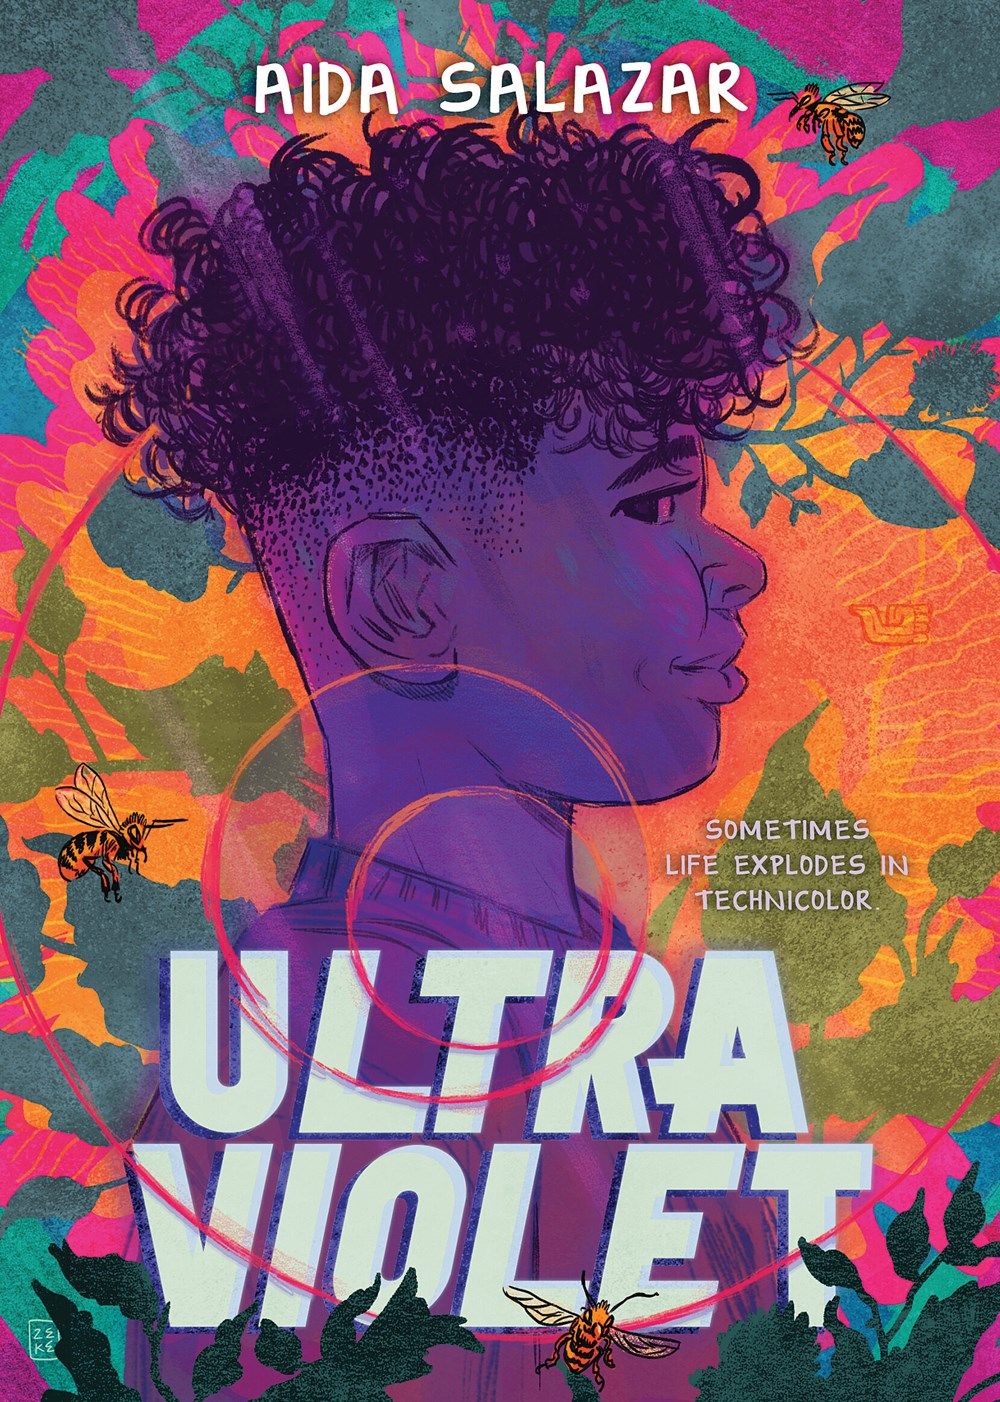 Cover of Ultraviolet by Aida Salazar